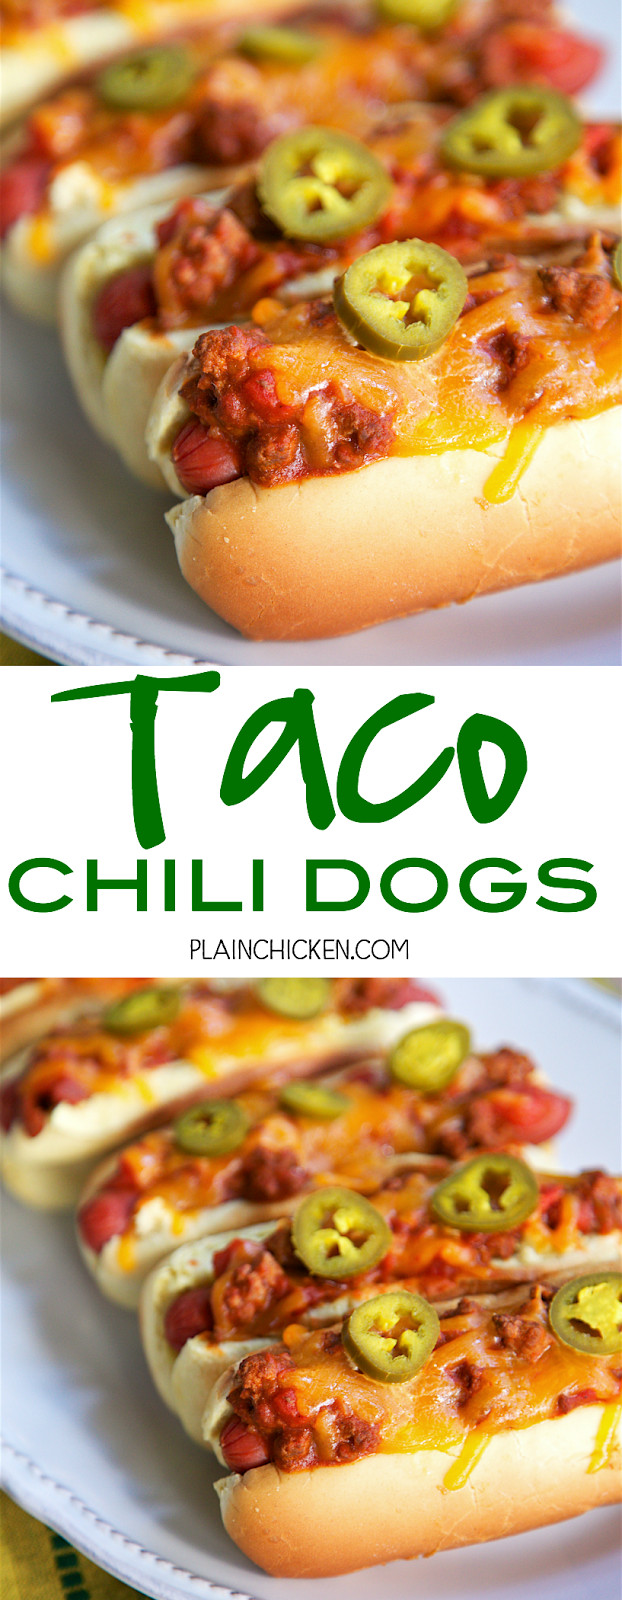 Can Dogs Eat Tomato Sauce
 Taco Chili Dogs hot dogs topped with a quick homemade